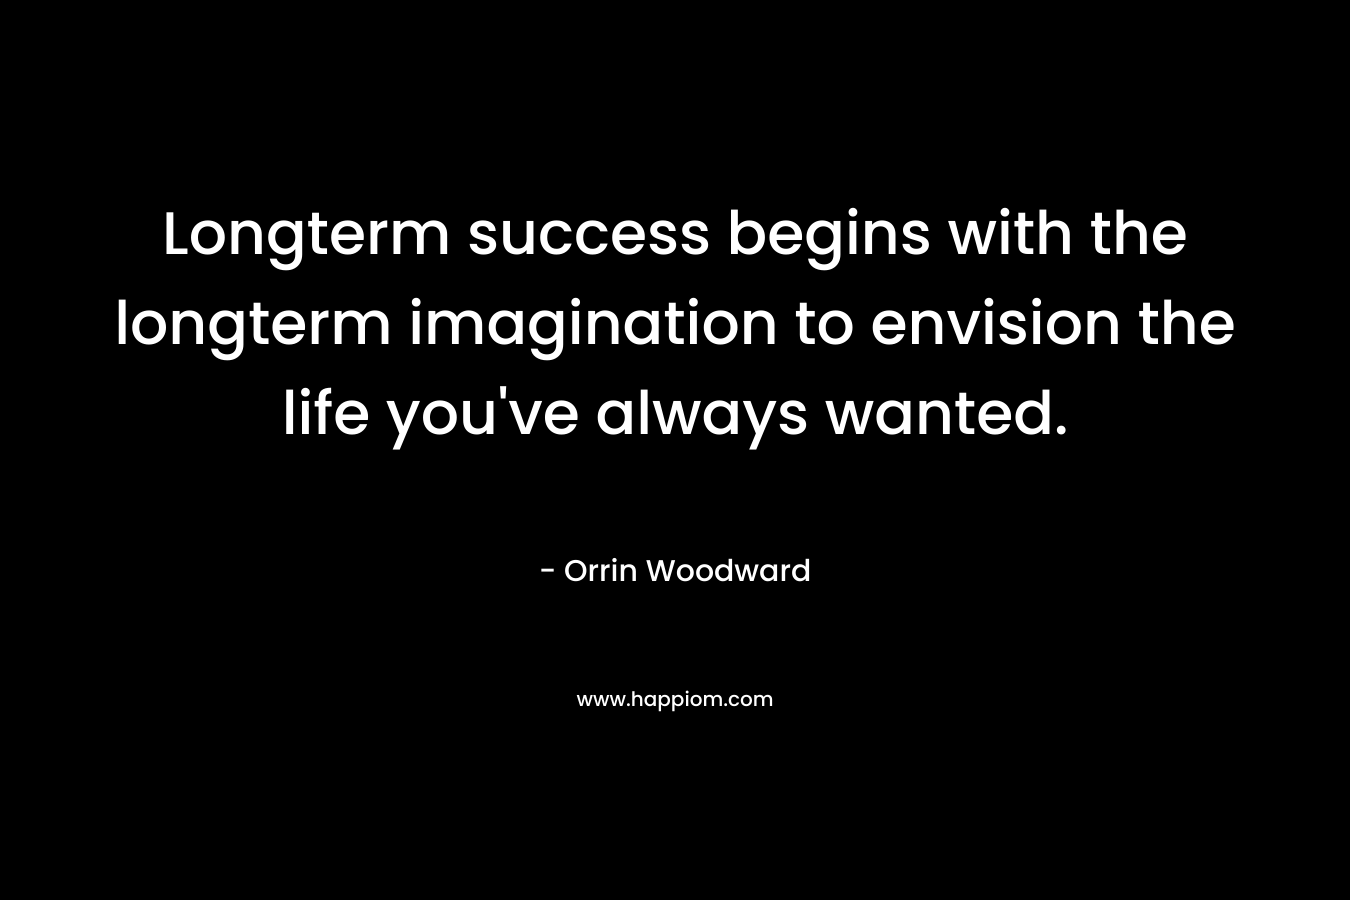 Longterm success begins with the longterm imagination to envision the life you’ve always wanted. – Orrin Woodward